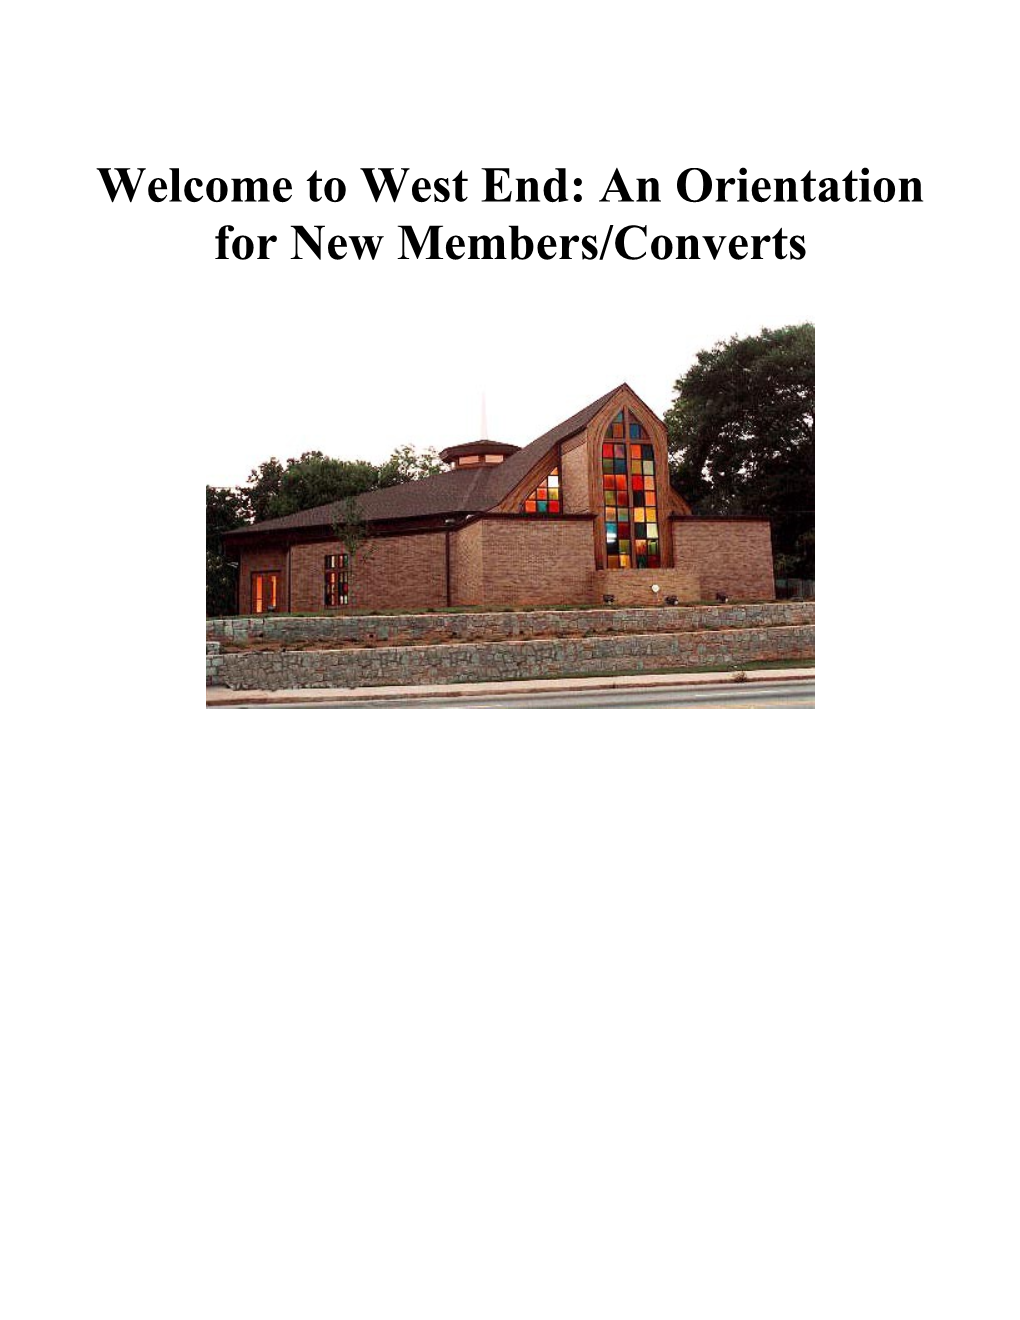 Welcome to West End: an Orientation Fornew Members/Converts